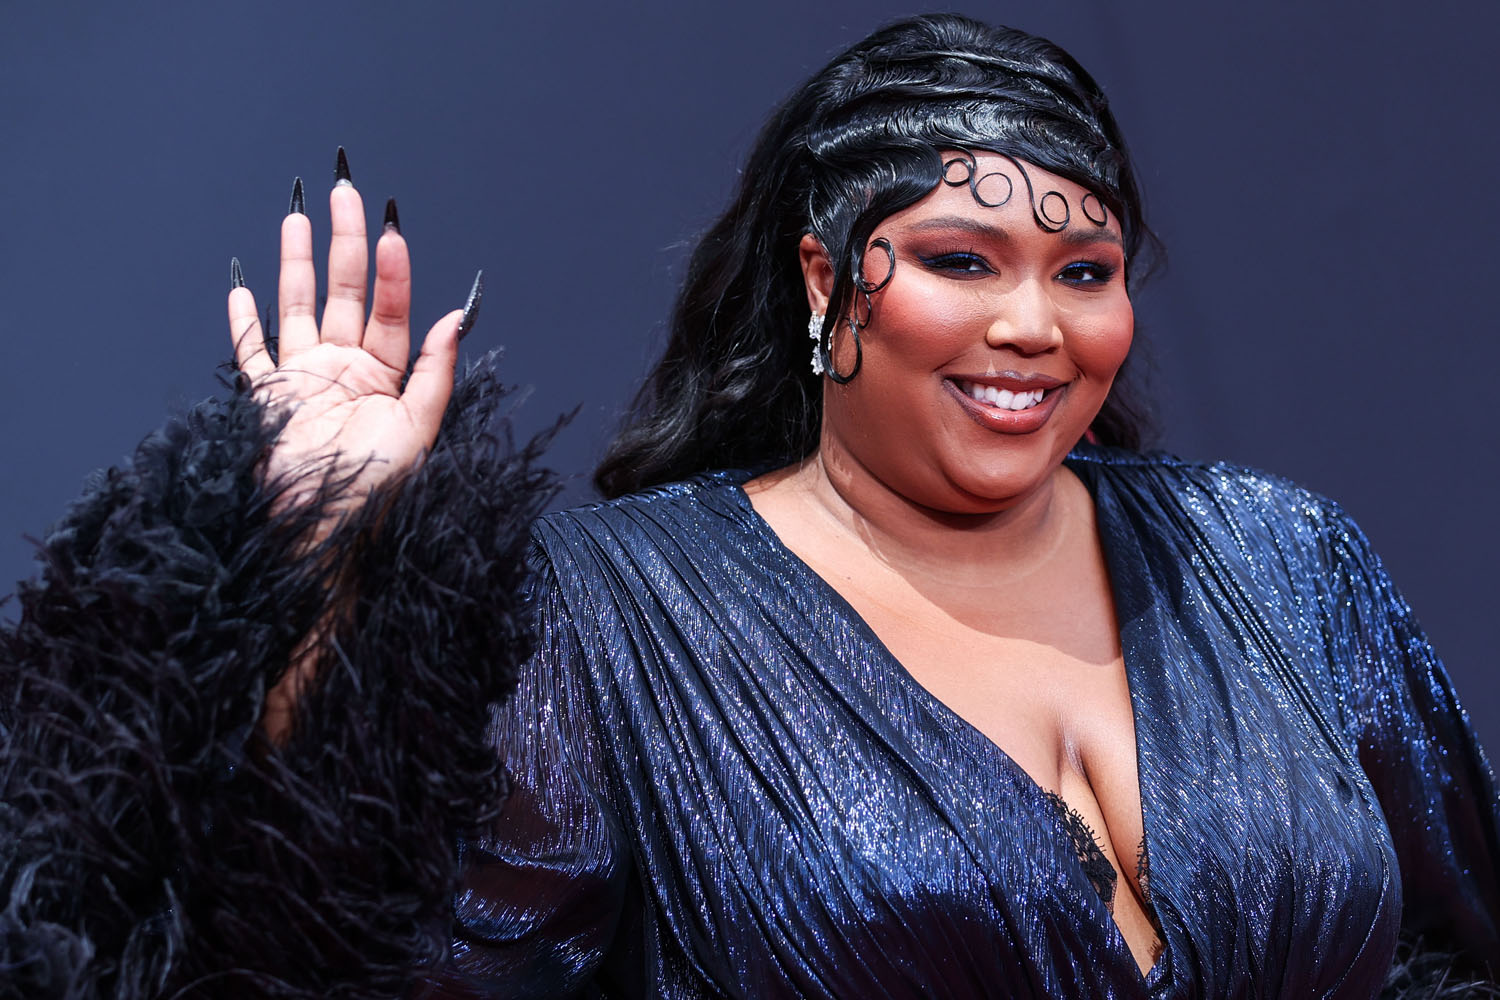 Lizzo is still in shock after Watch Out For The Big Grrrls was